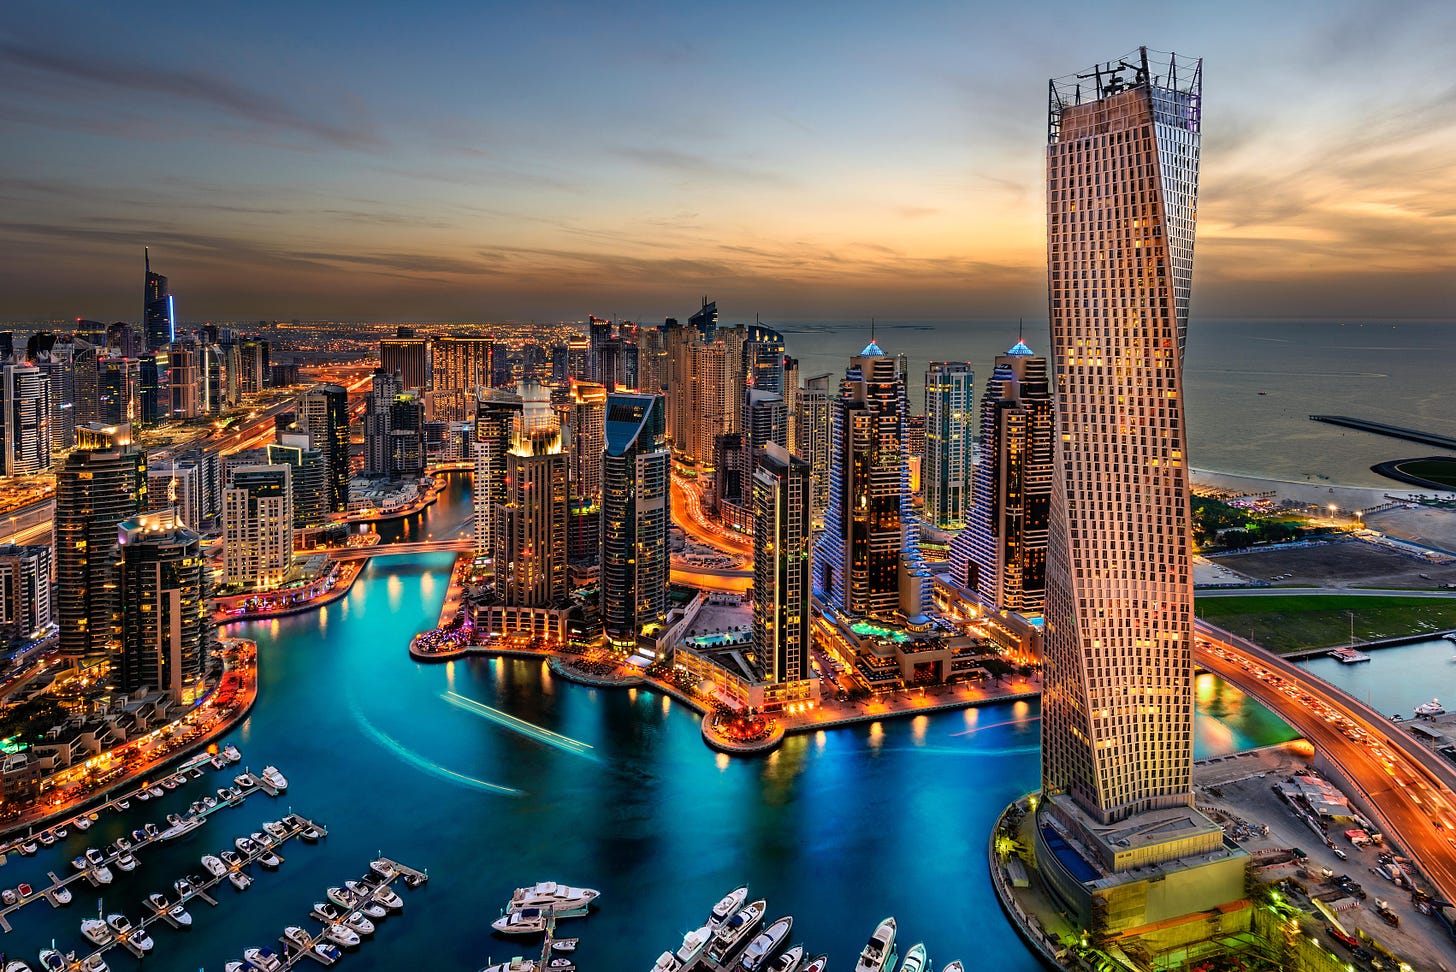 First time Dubai: tips for your first visit to the city of gold – Lonely  Planet - Lonely Planet